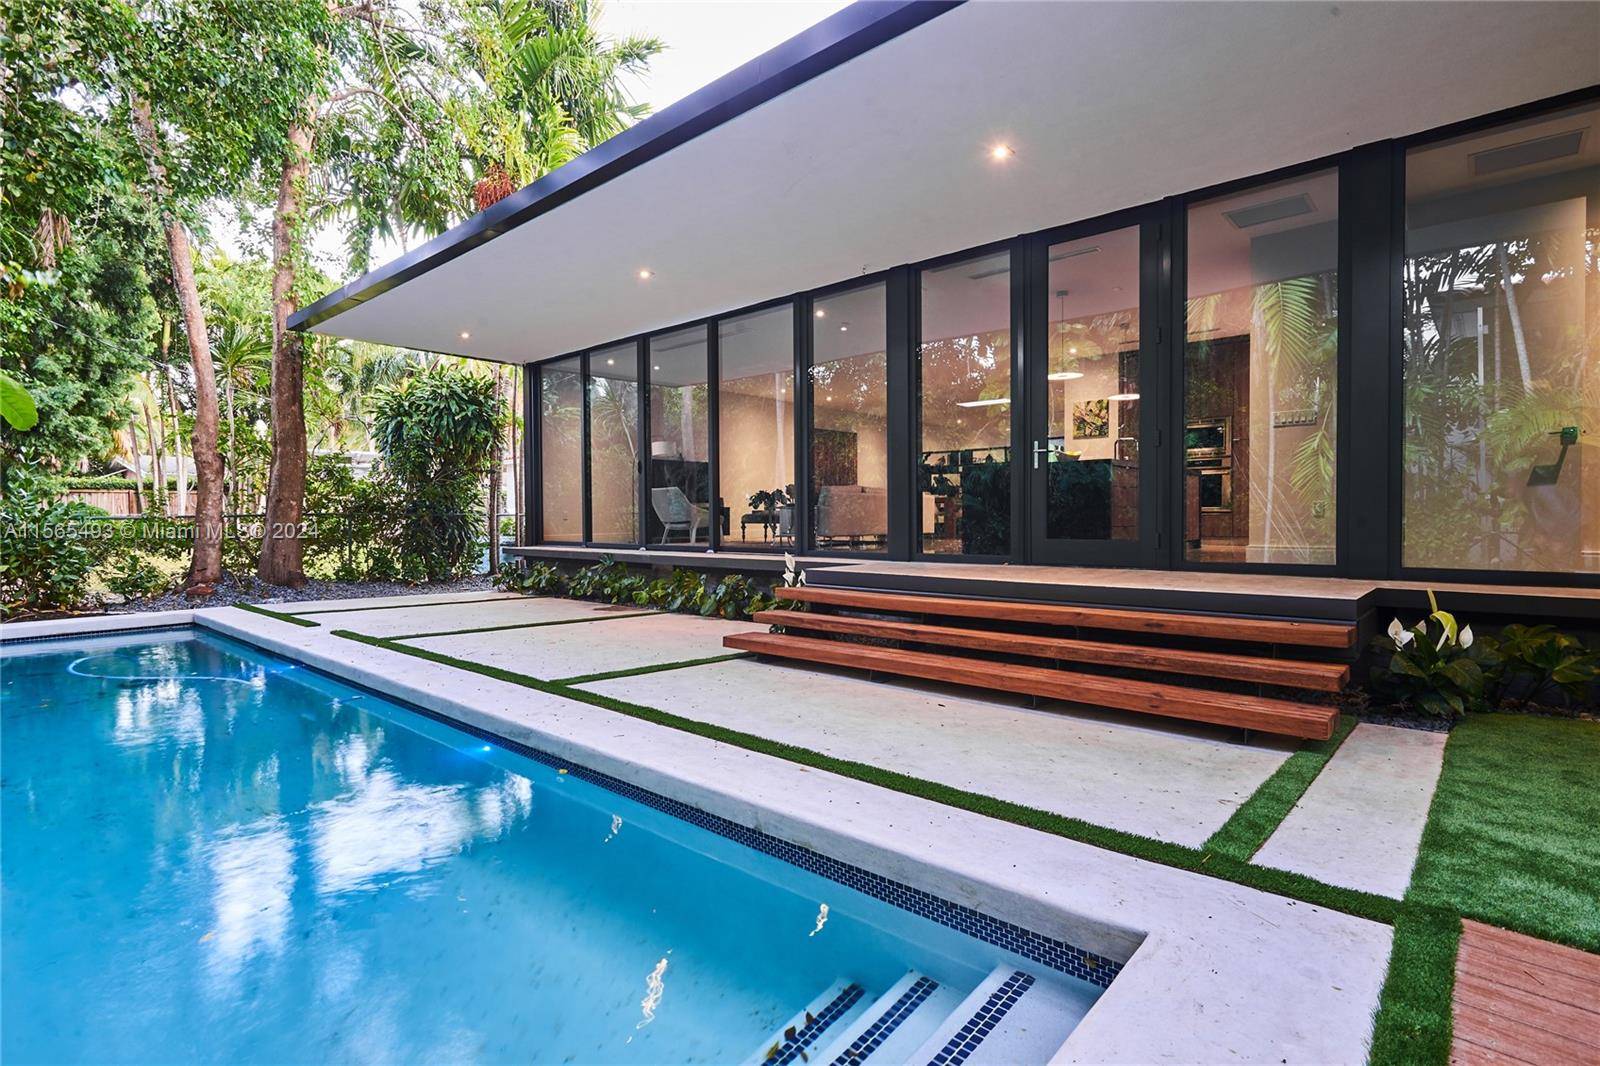 DESIGNED BY FAMED ARCHITECT JACOB BRILLHART THIS MODERN TROPICAL RESIDENCE SITUATED THE HEART OF COCONUT GROVE SPANS OVER 3500 SQ FEET AND IS PROUDLY L.